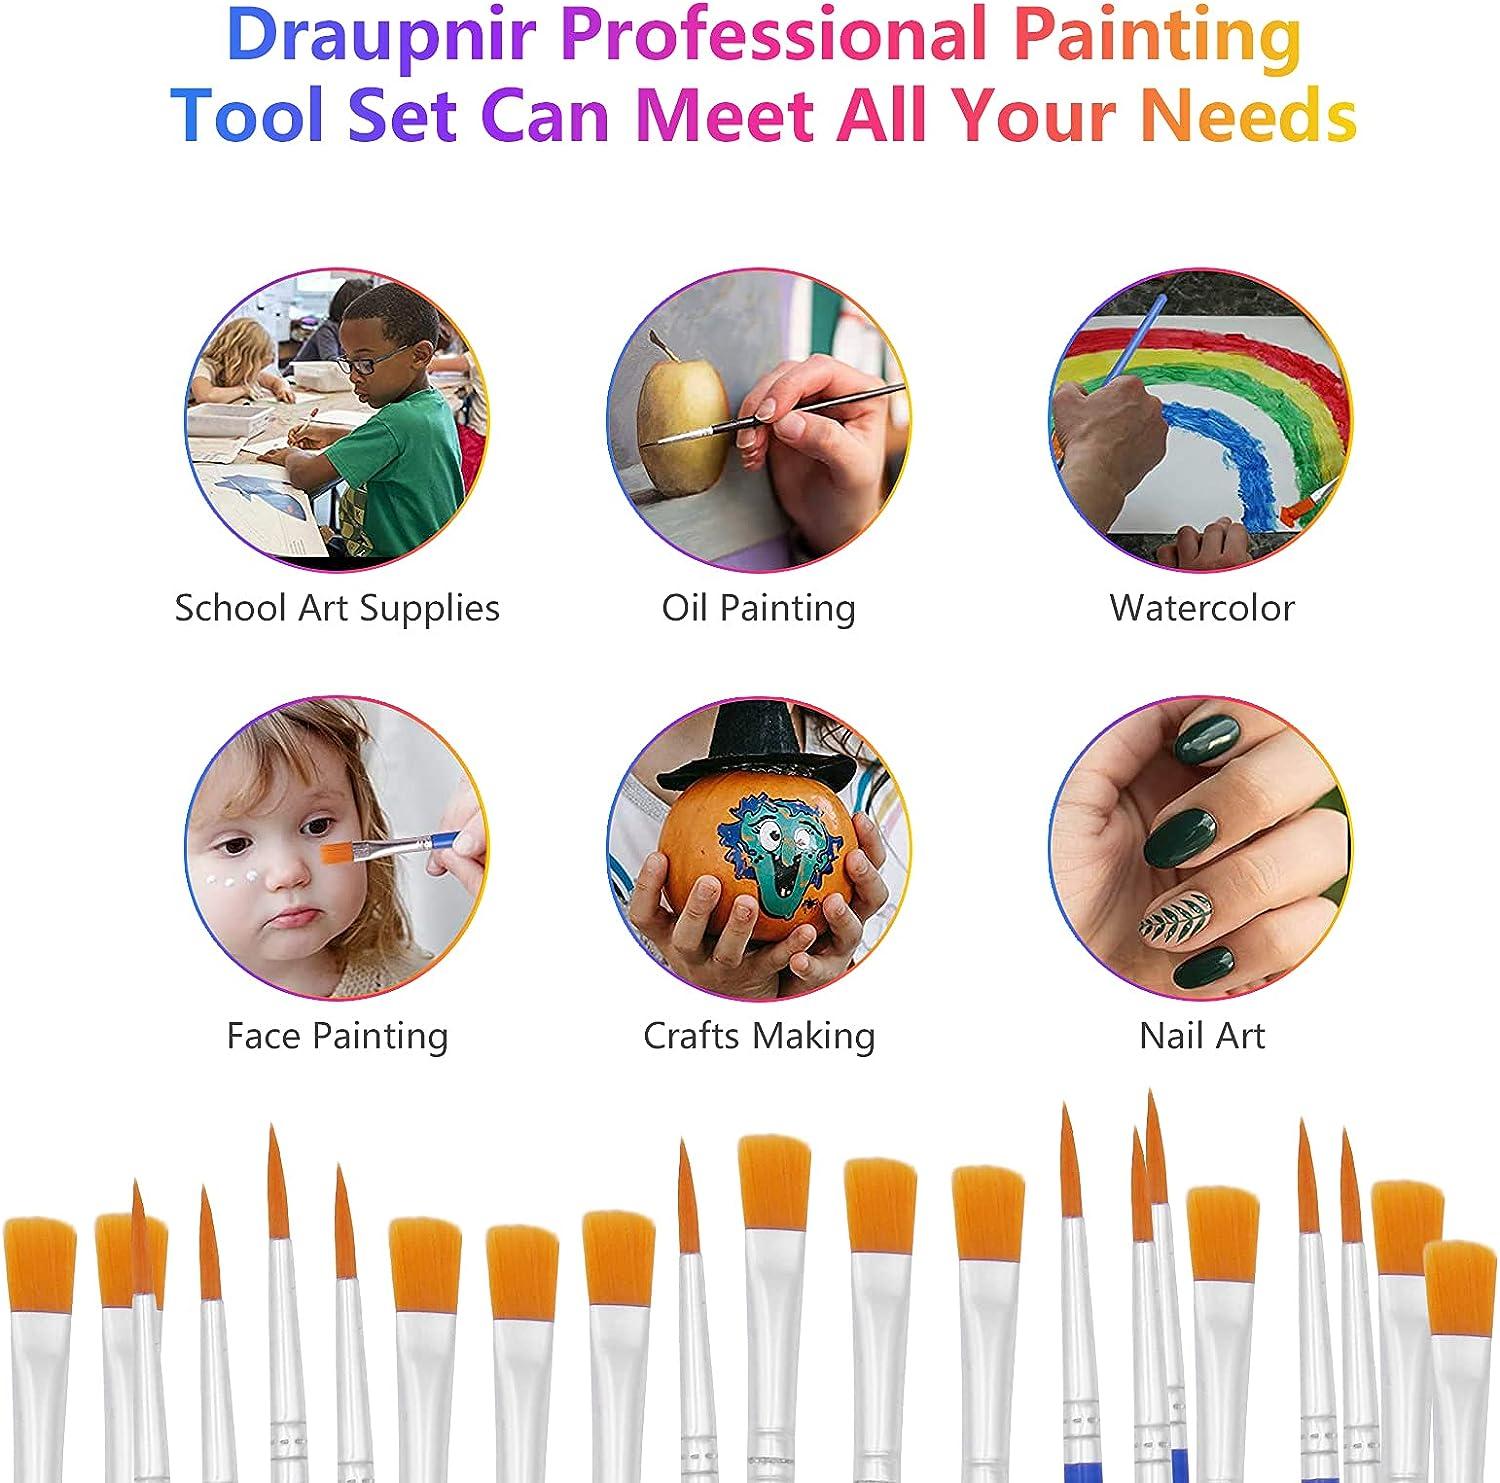 6pcs Art Brush Set For Painting, 6 Types Of Brushes, Suitable For  Classrooms, Artists - Beautiful Art Brushes For Painting